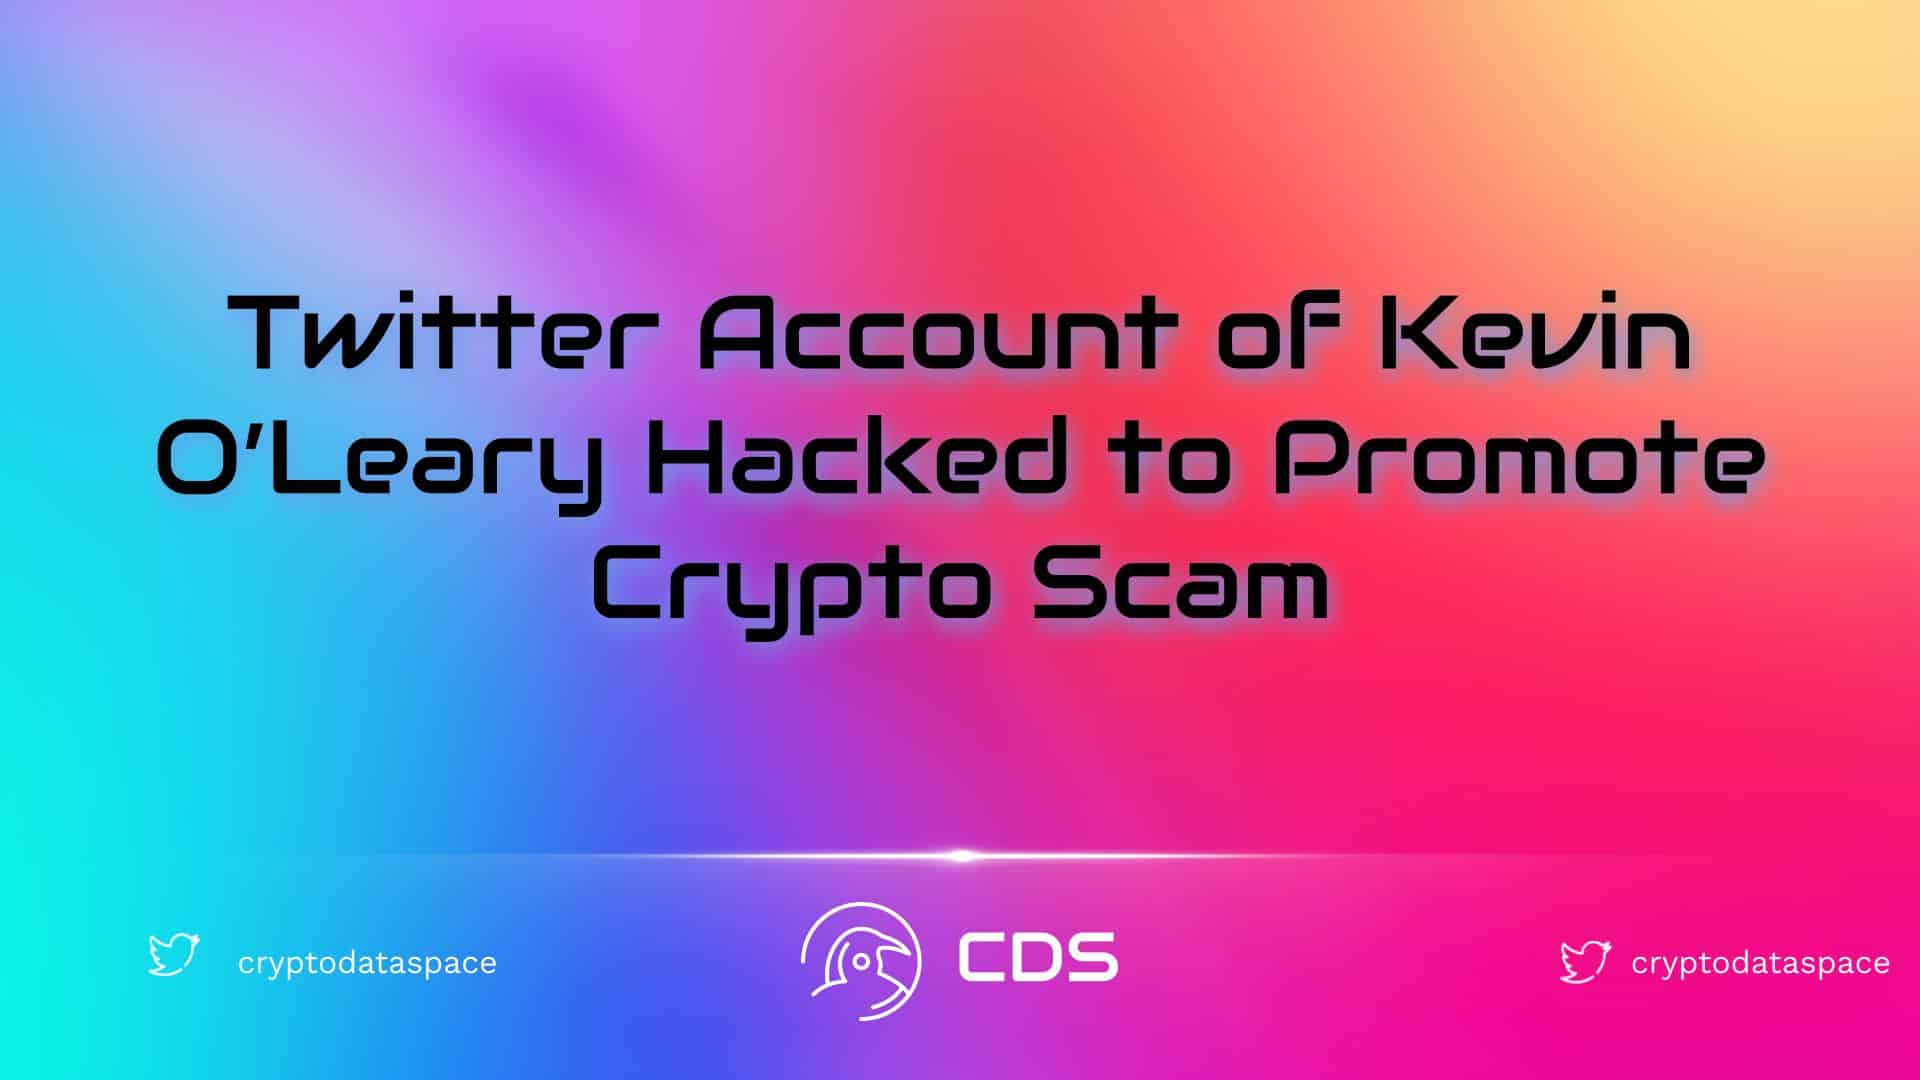 Twitter Account of Kevin O'Leary Hacked to Promote Crypto Scam